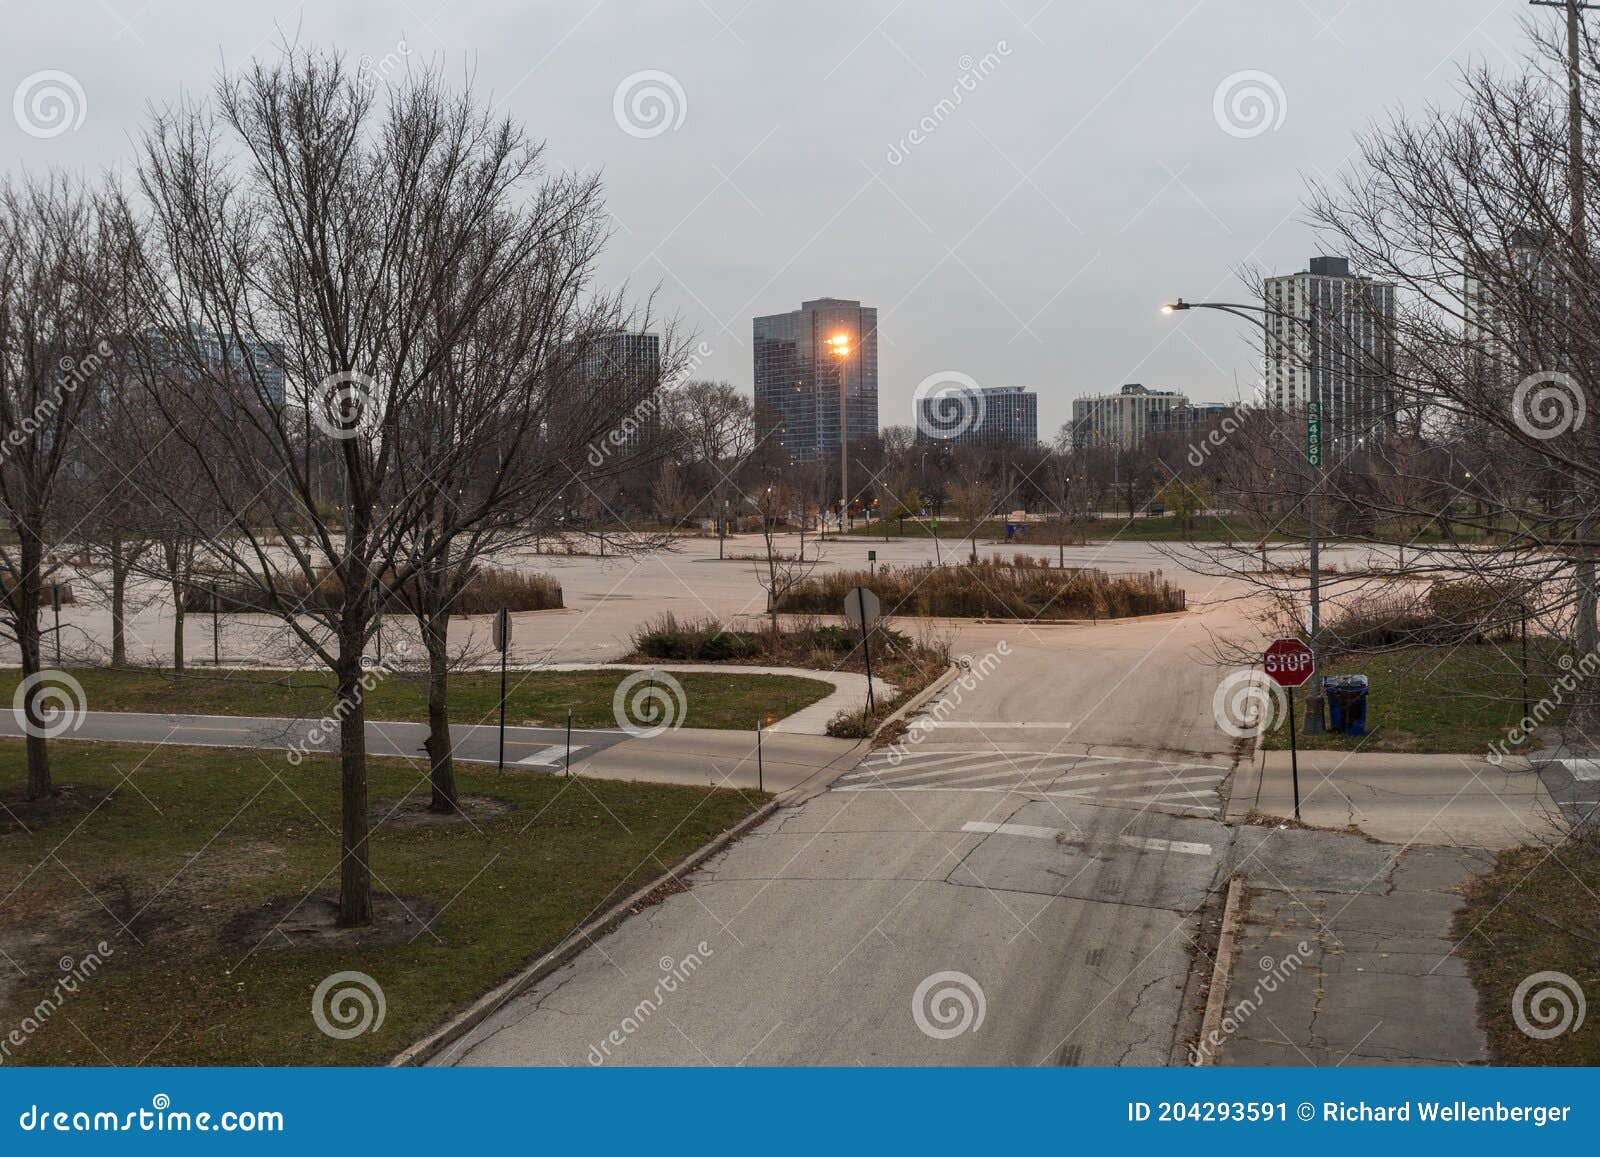 empty parking lot with barren trees and highrises in the background